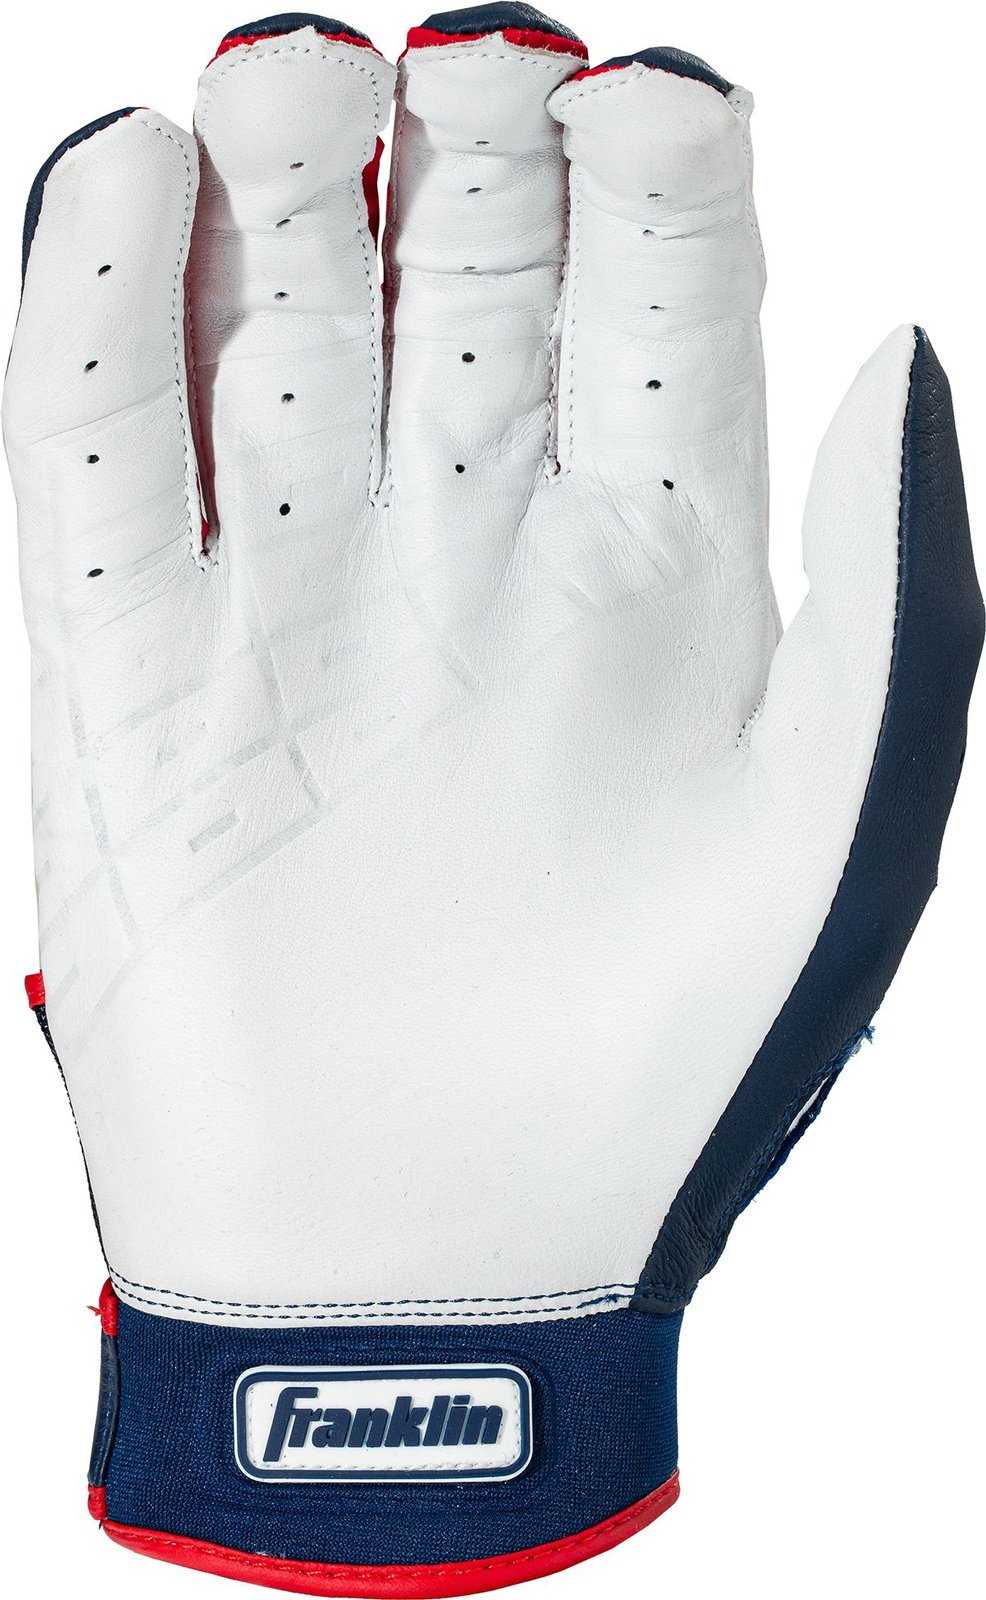 Franklin Powerstrap Hi-Lite Adult Batting Gloves - Red White Blue - HIT a Double